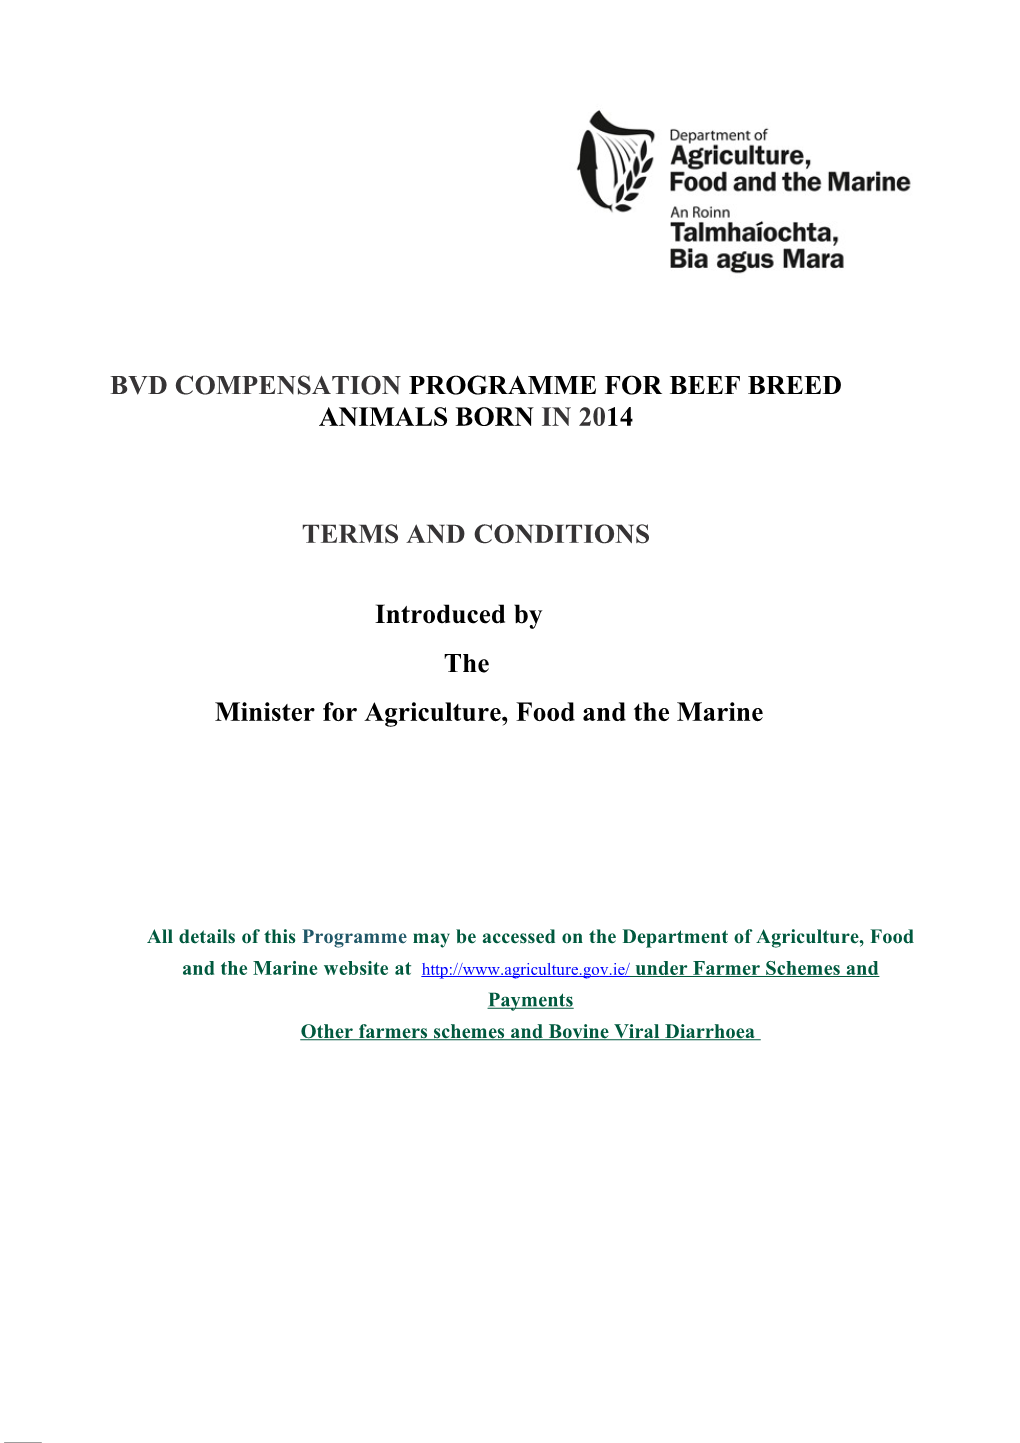 Bvd Compensation Programme for Beef Breed Animals Born in 2014